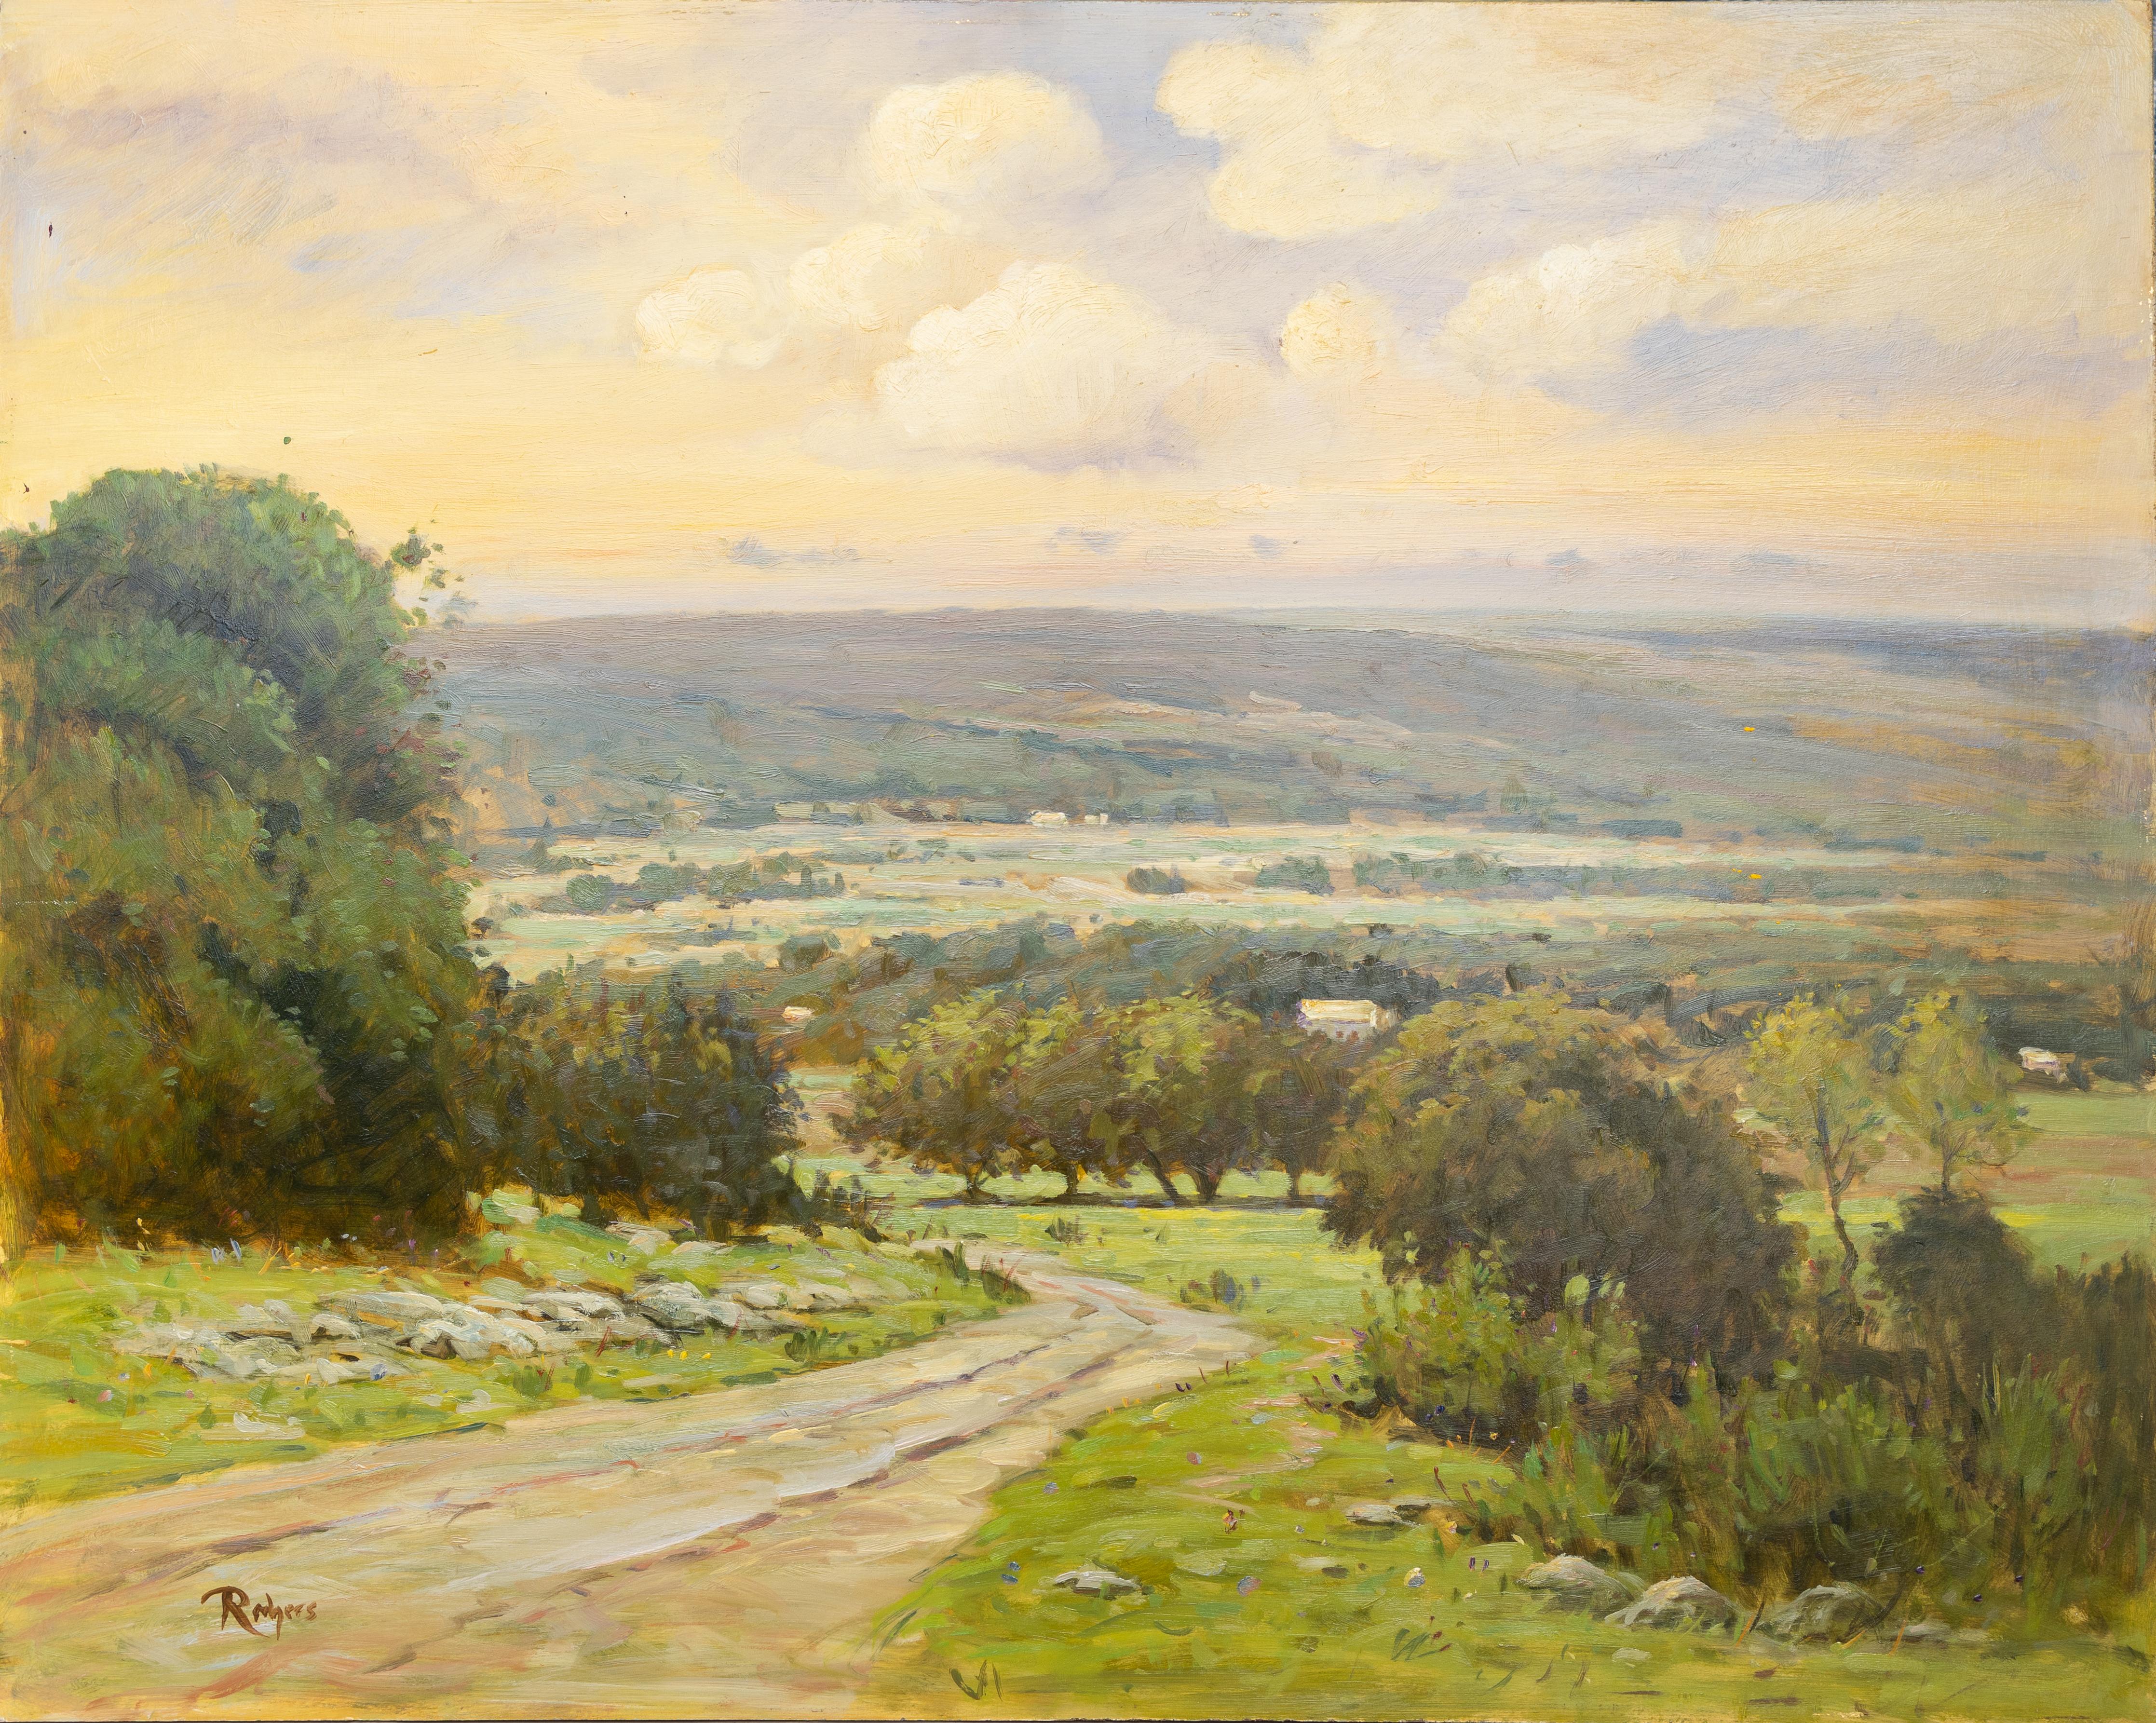 Jim Rodgers Landscape Painting - "Evening in the Hill Country" Texas Spring Landscape